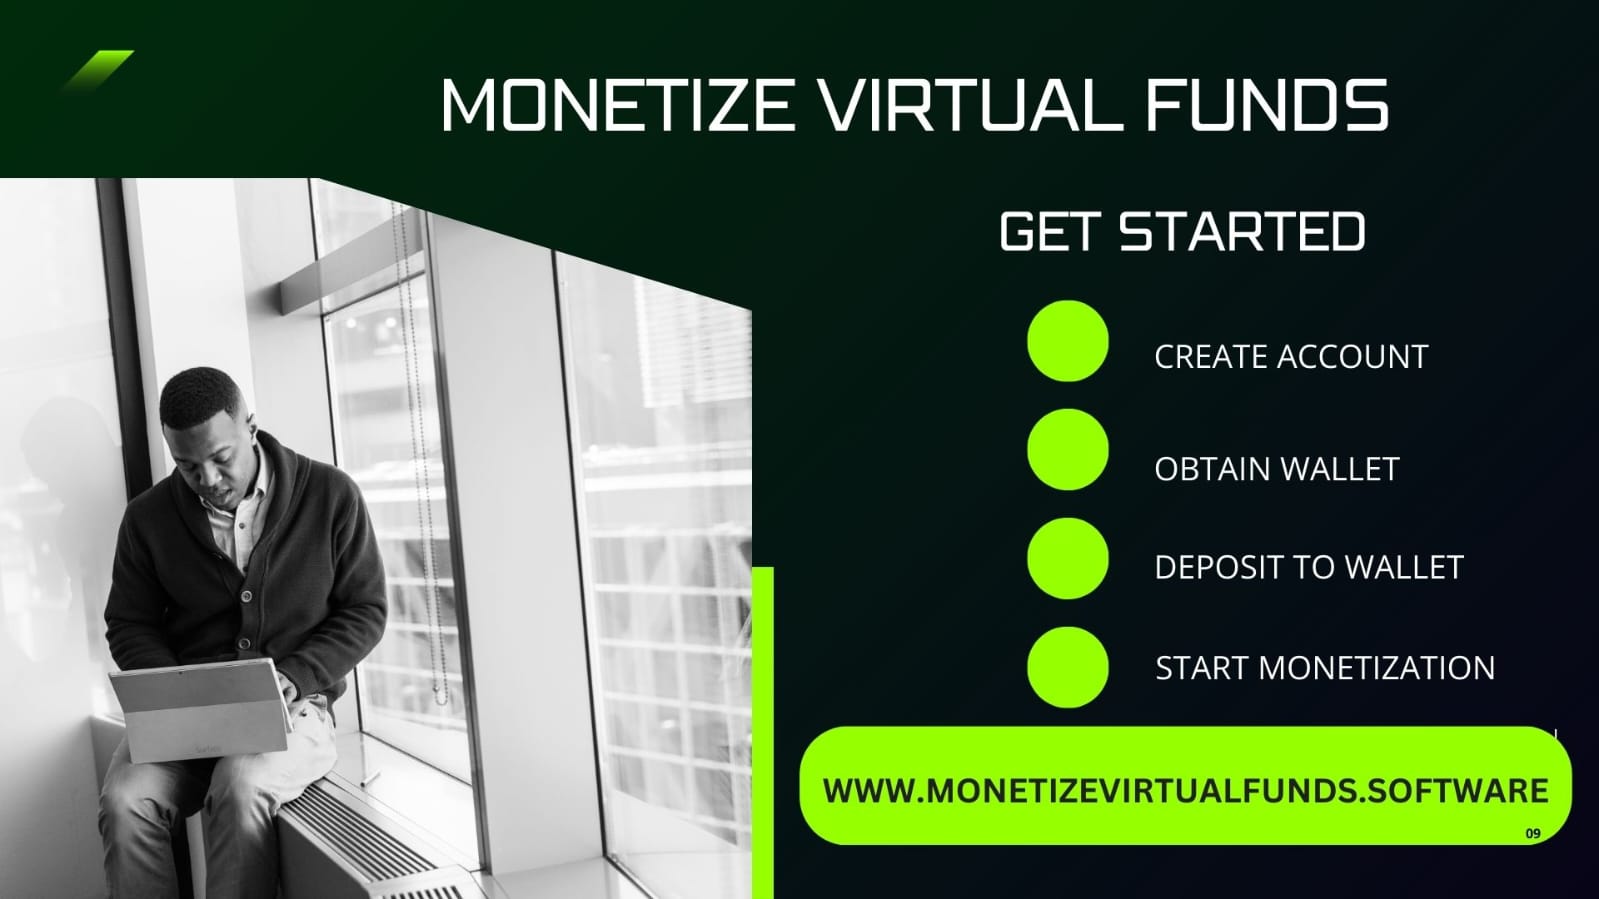 getting-started-with-monetize-virtual-funds-software